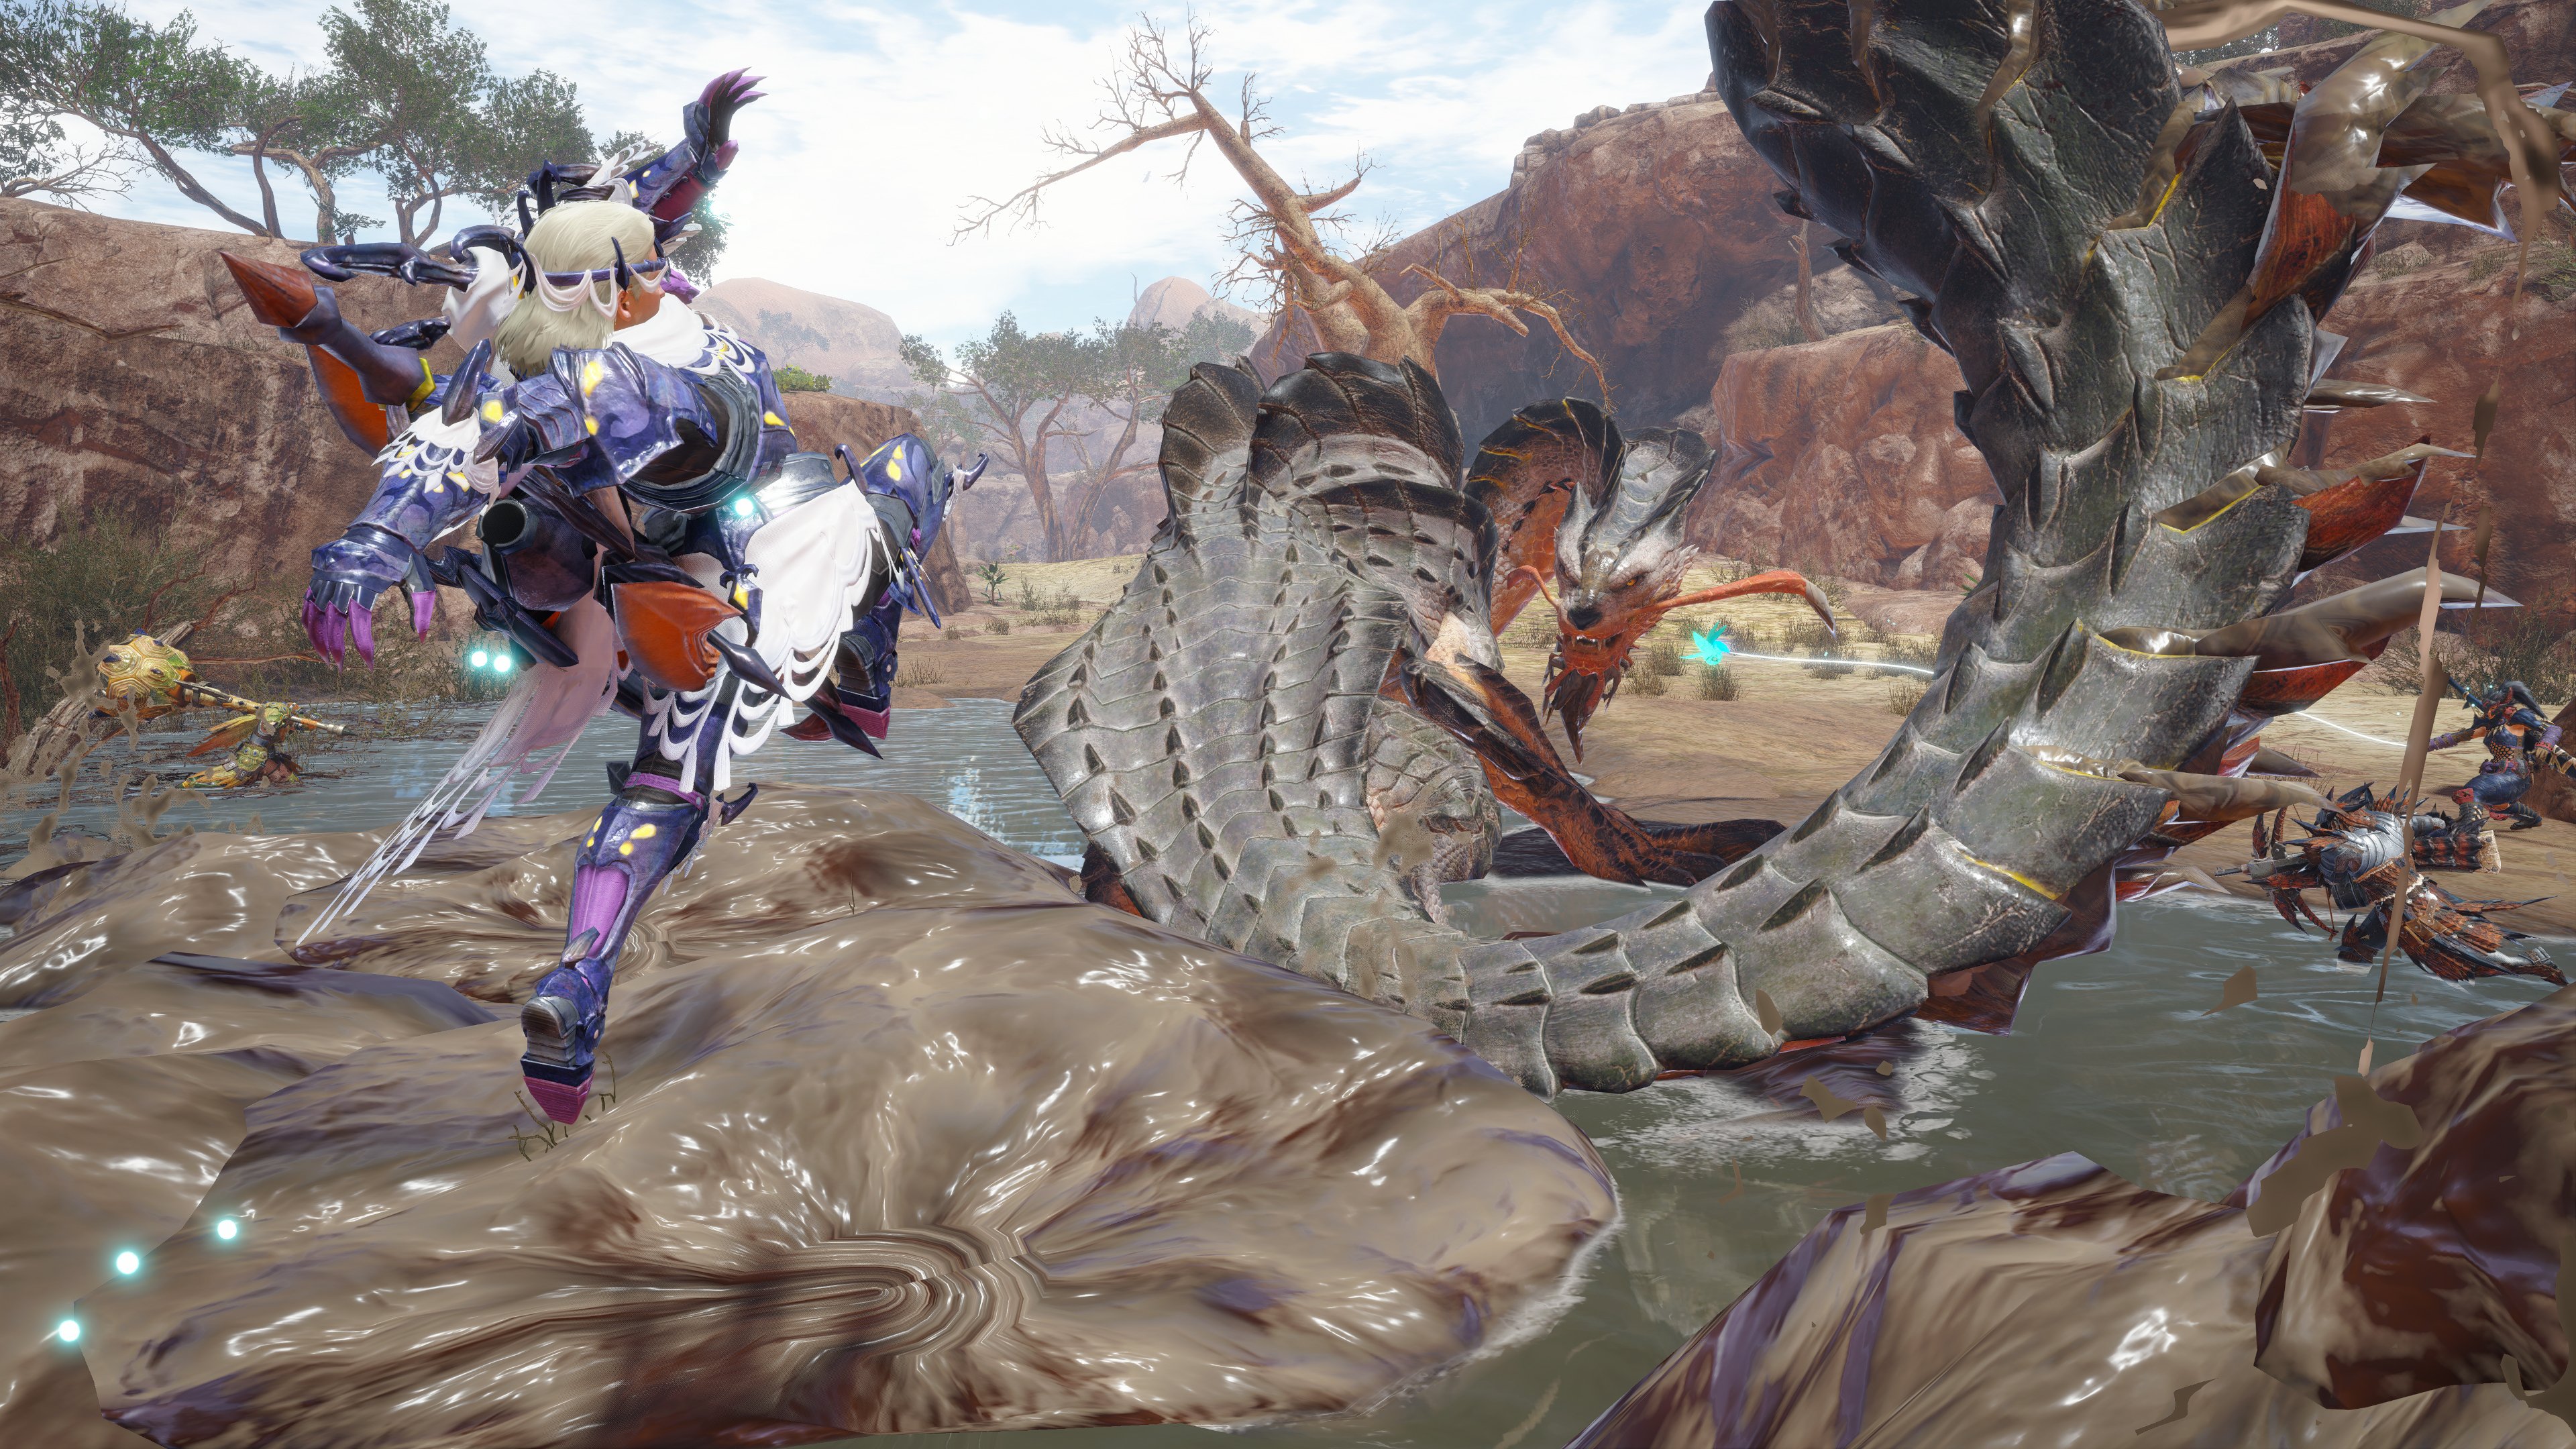 Monster Hunter Rise for PS5 and Xbox is official – still no crossplay